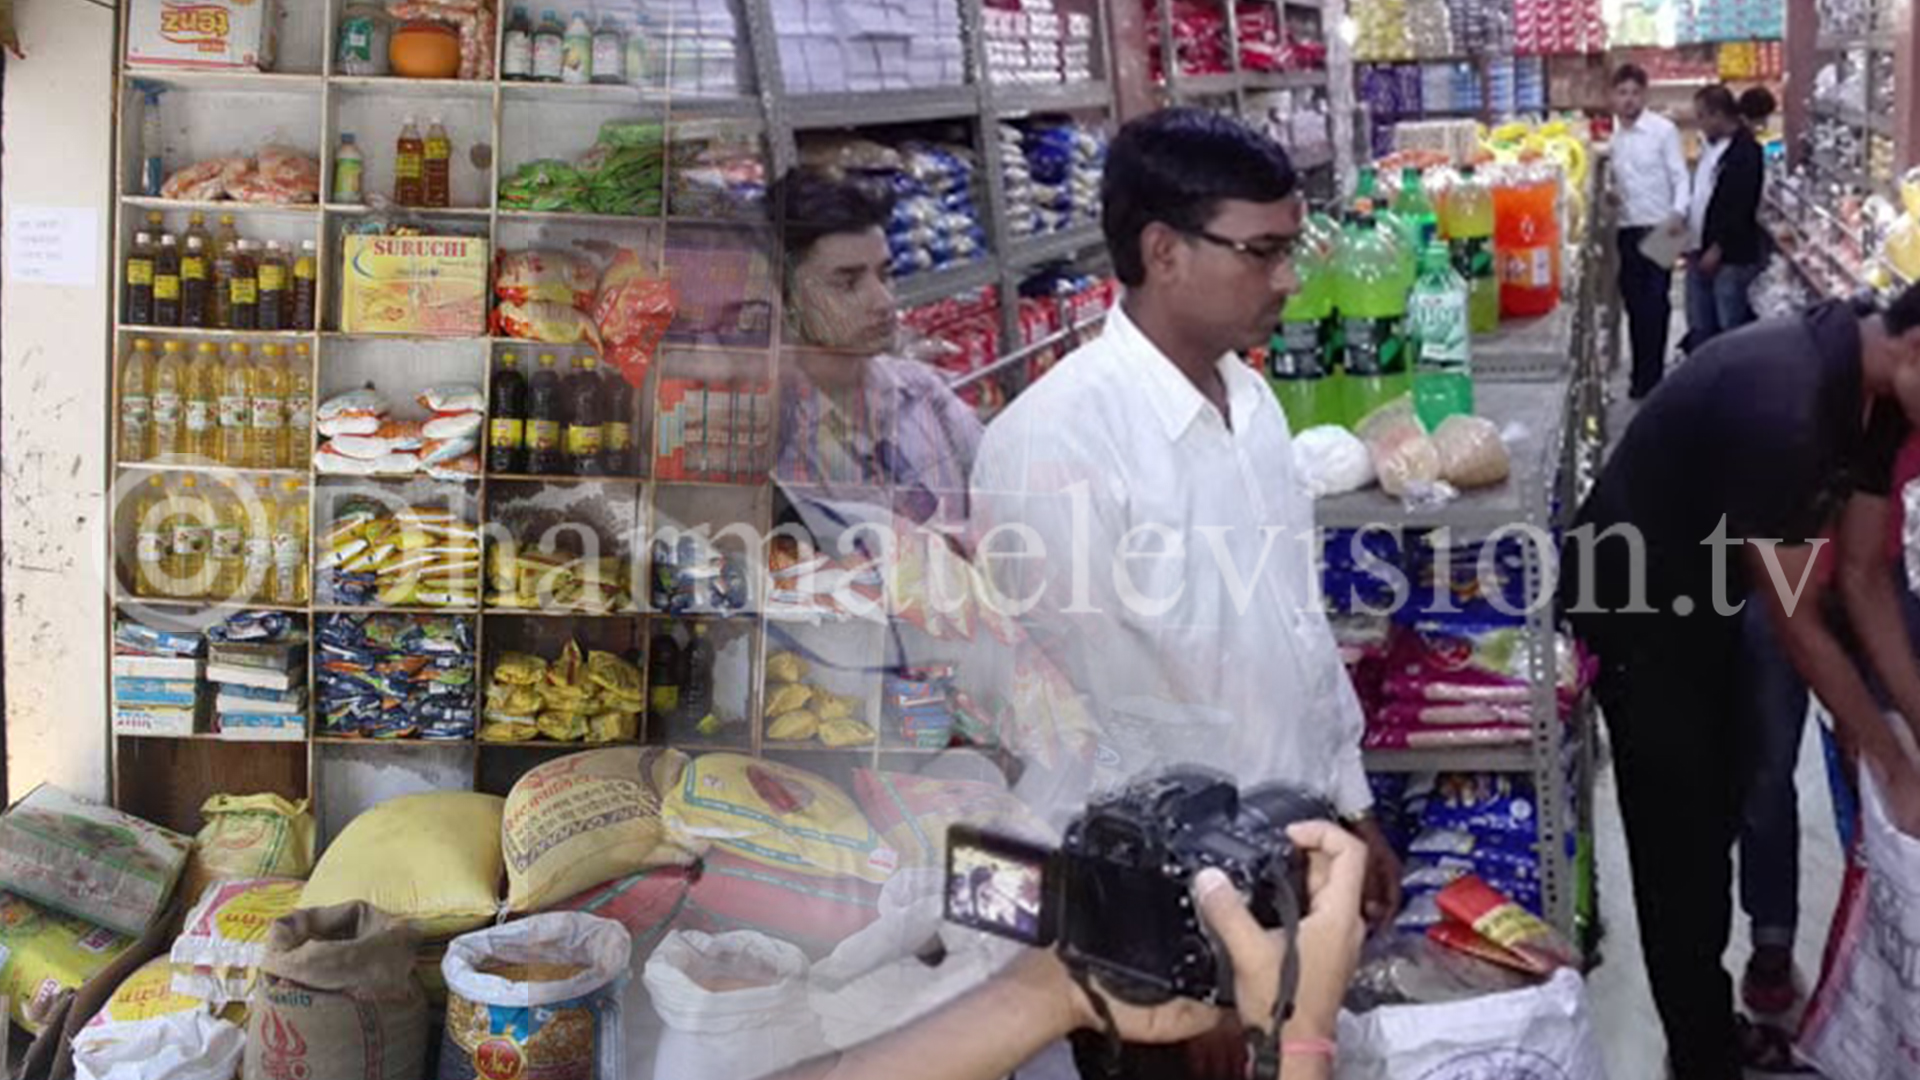 Monitoring of metropolis in sale and distribution of food items